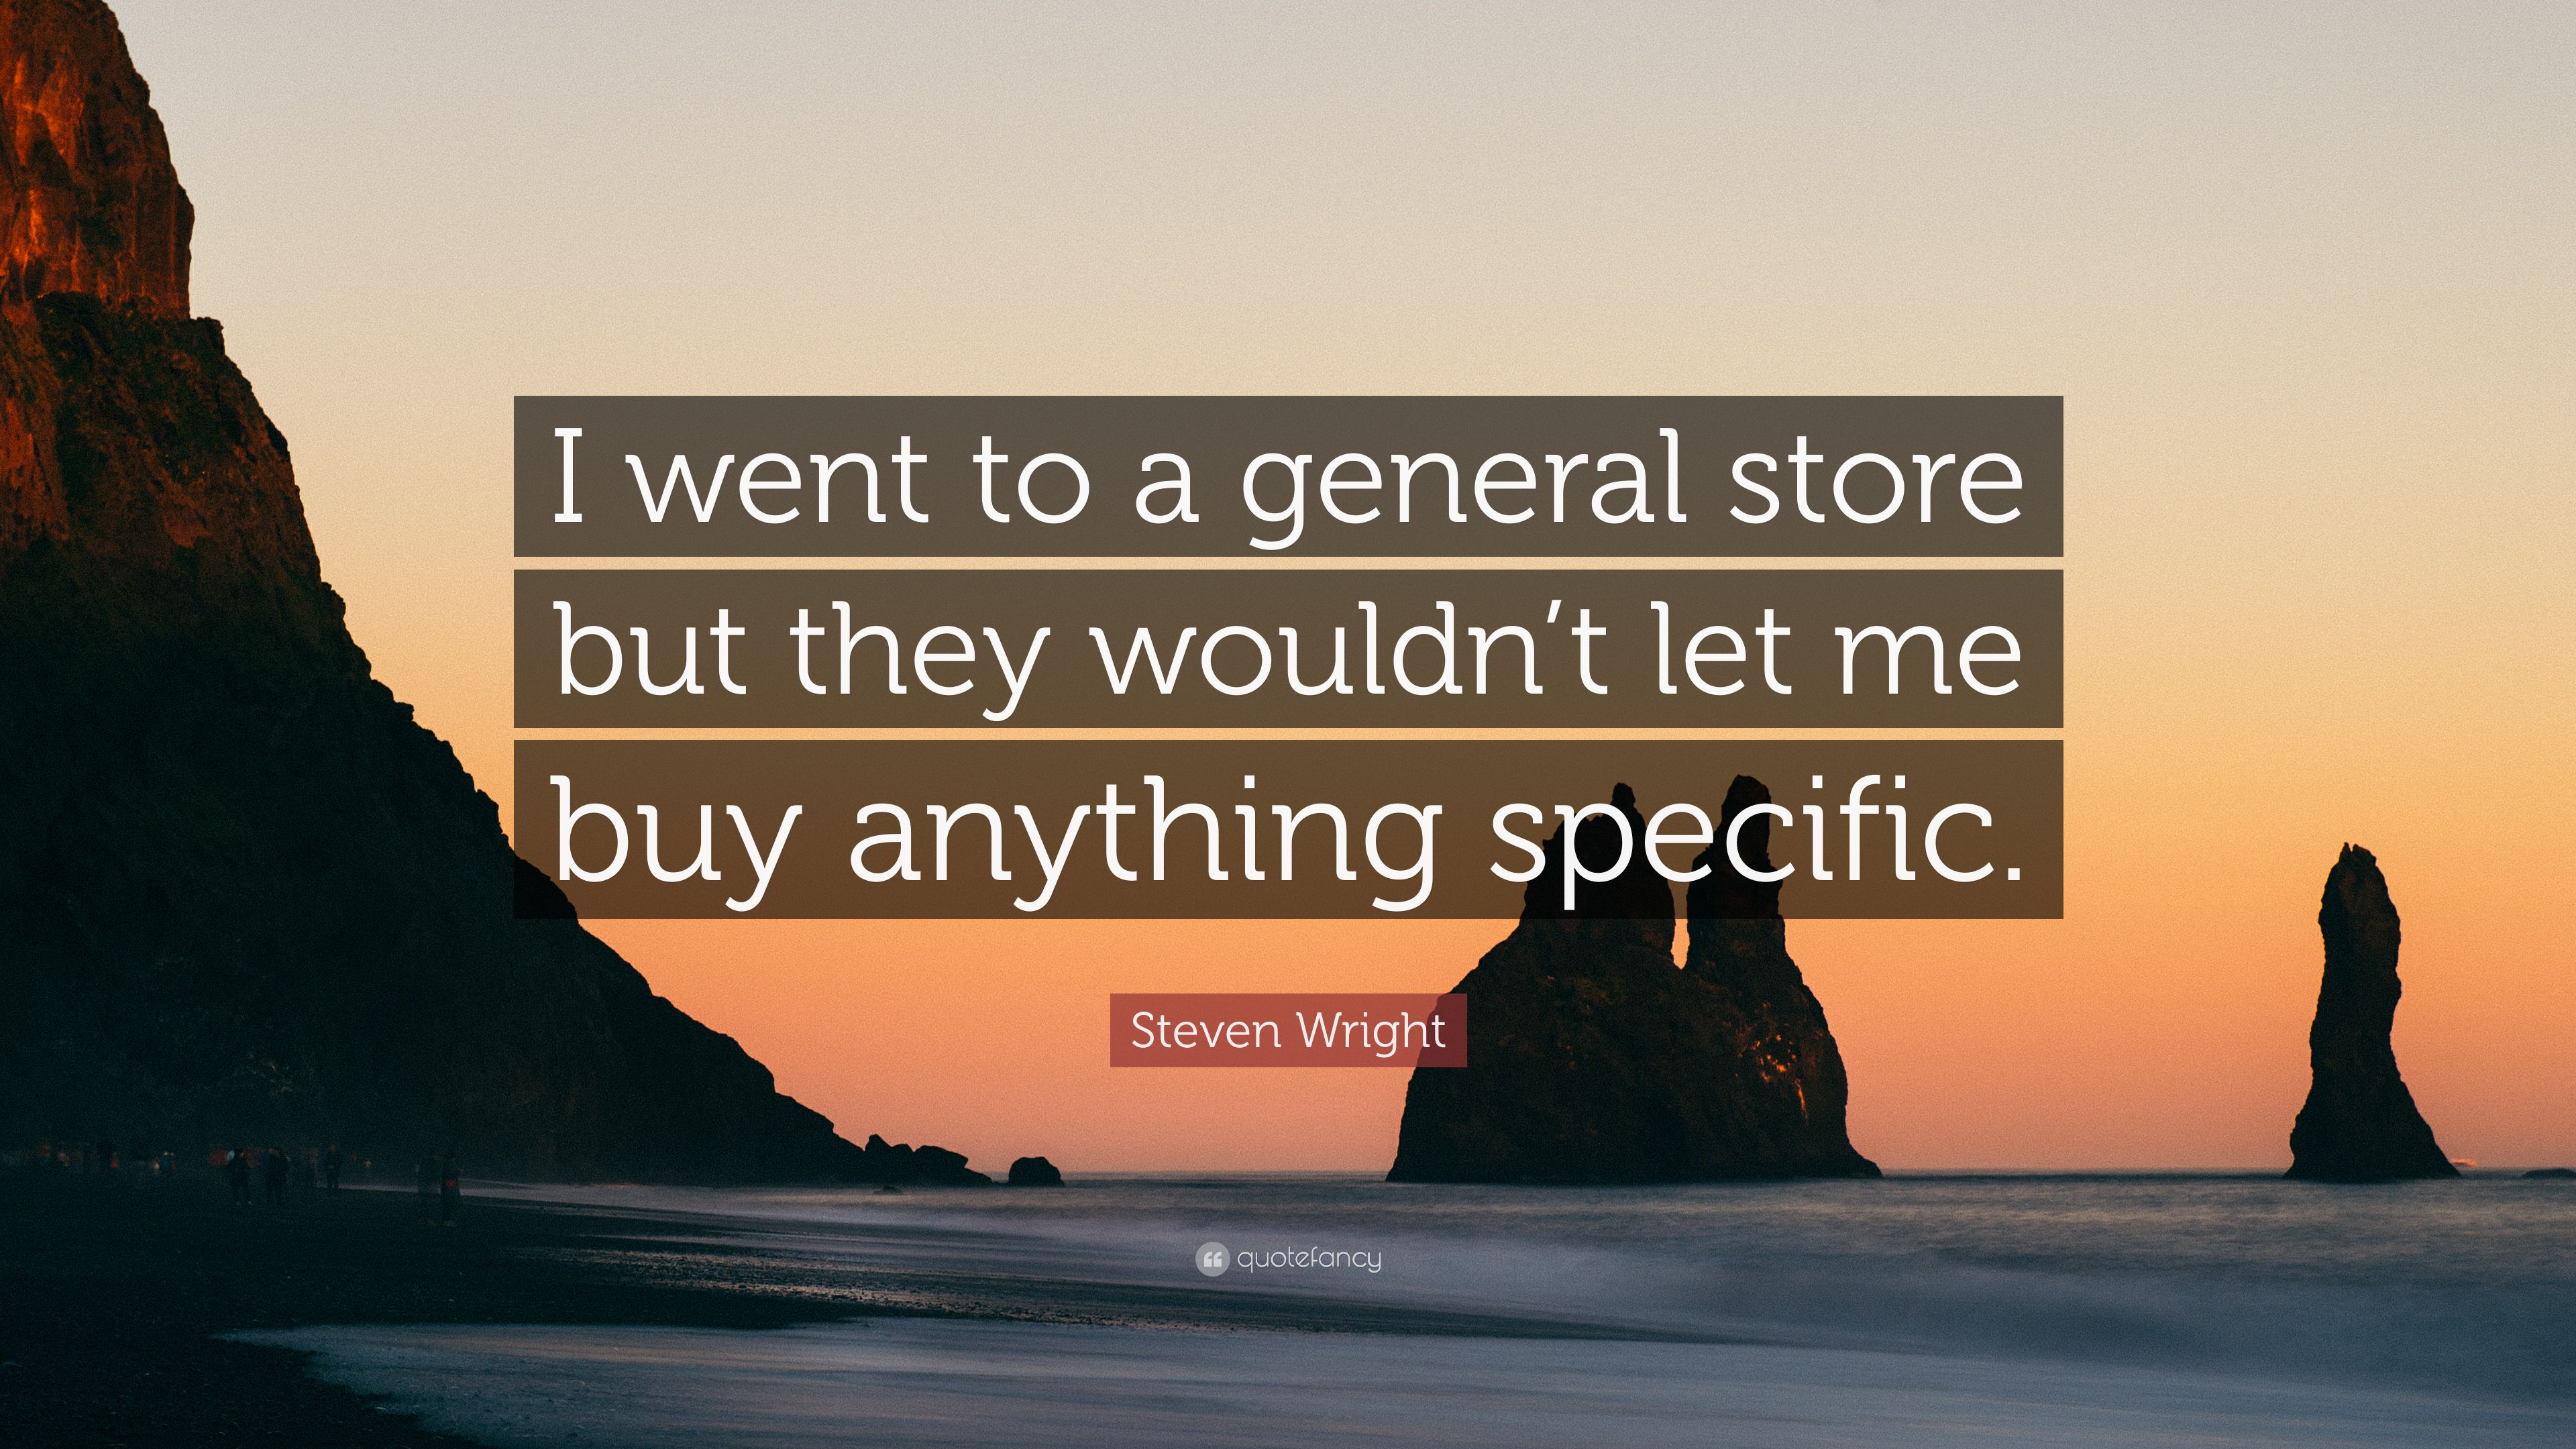 Steven Wright Quote: “I went to a general store but they